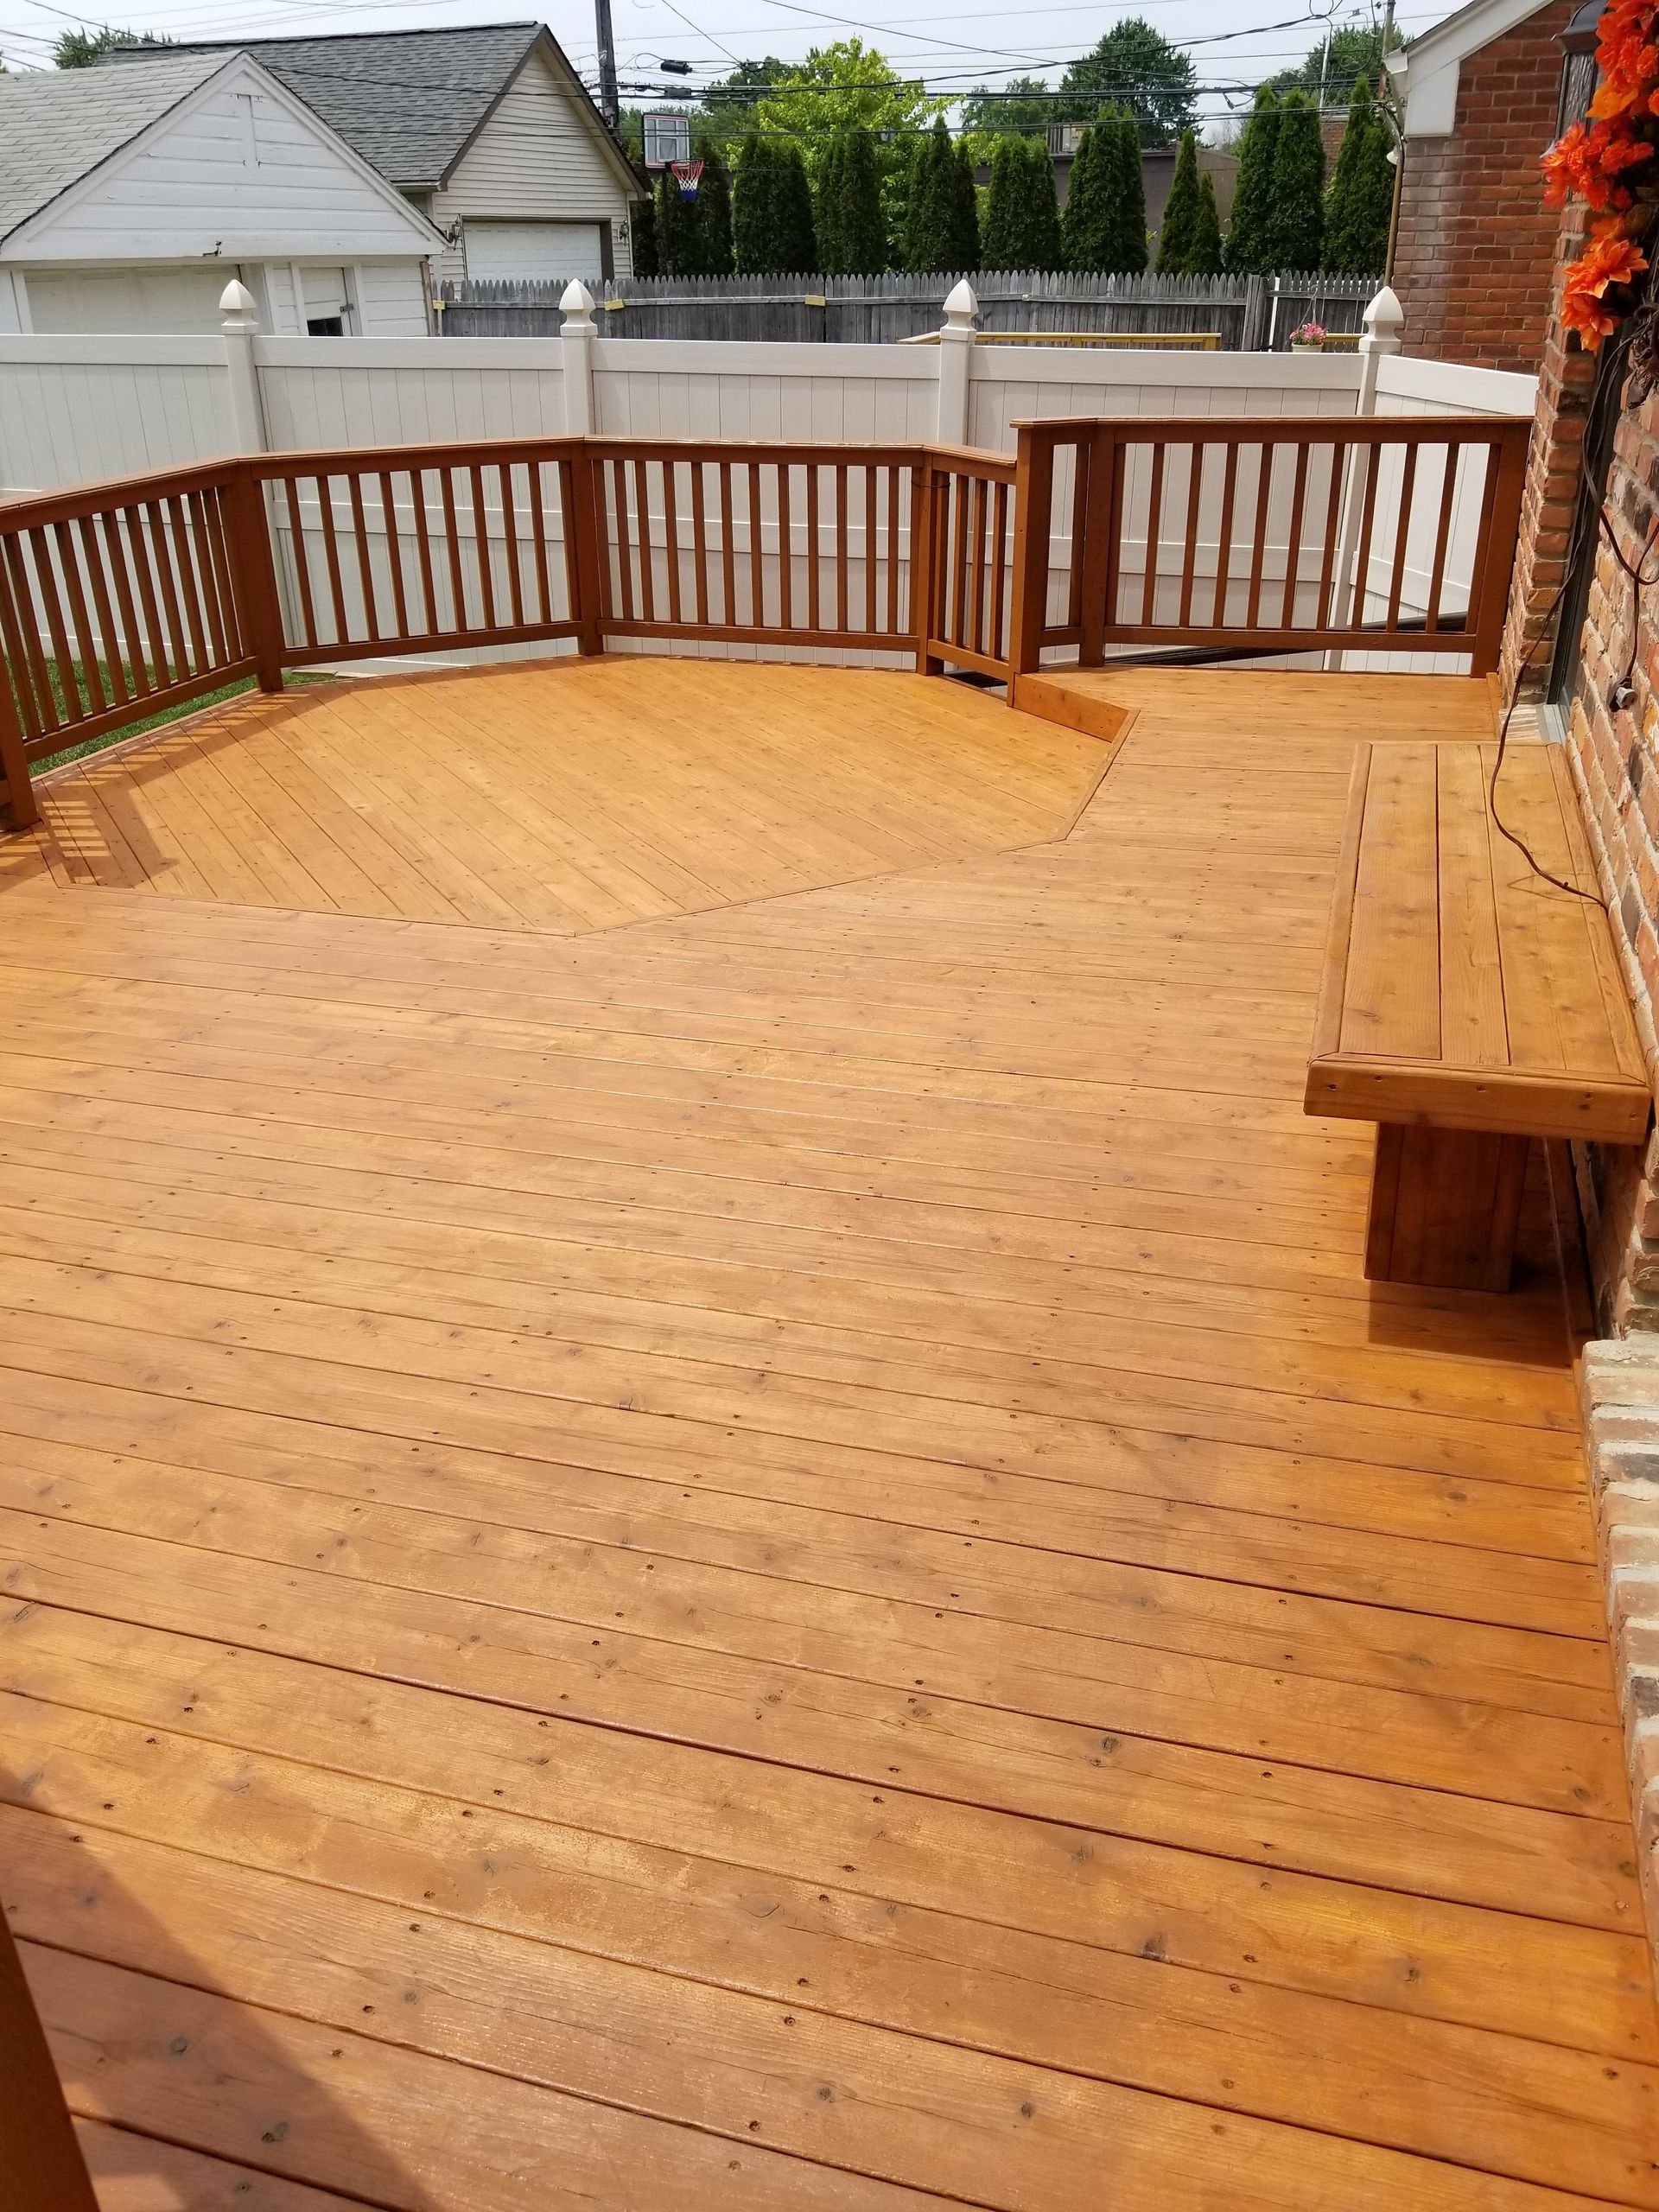 A large wooden deck with a bench and railing.